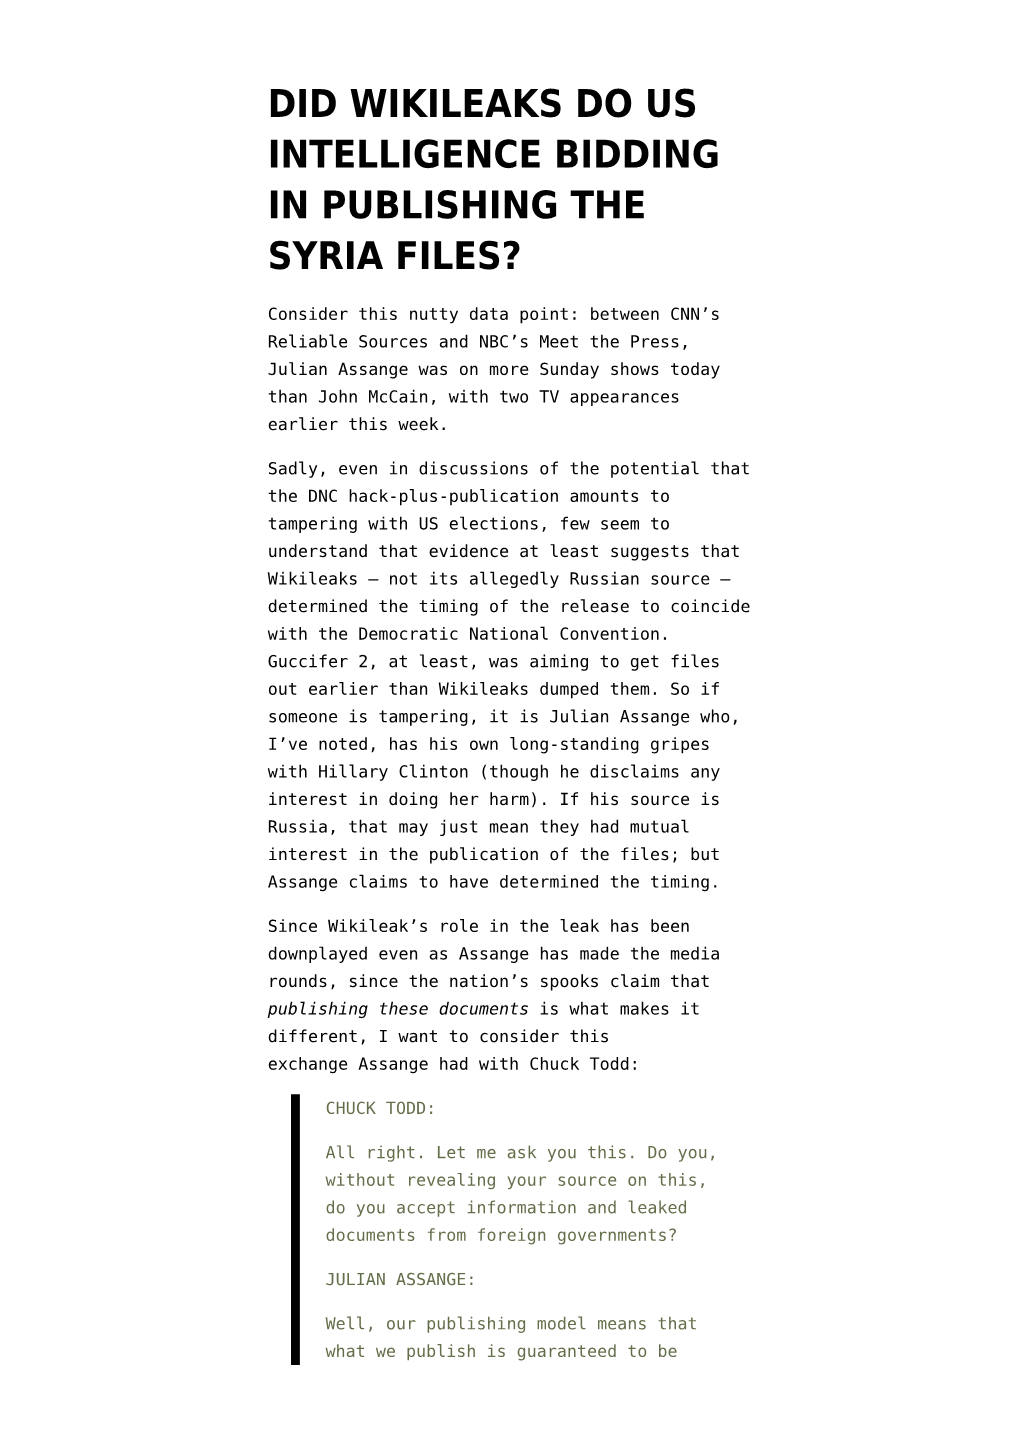 Did Wikileaks Do Us Intelligence Bidding in Publishing the Syria Files?